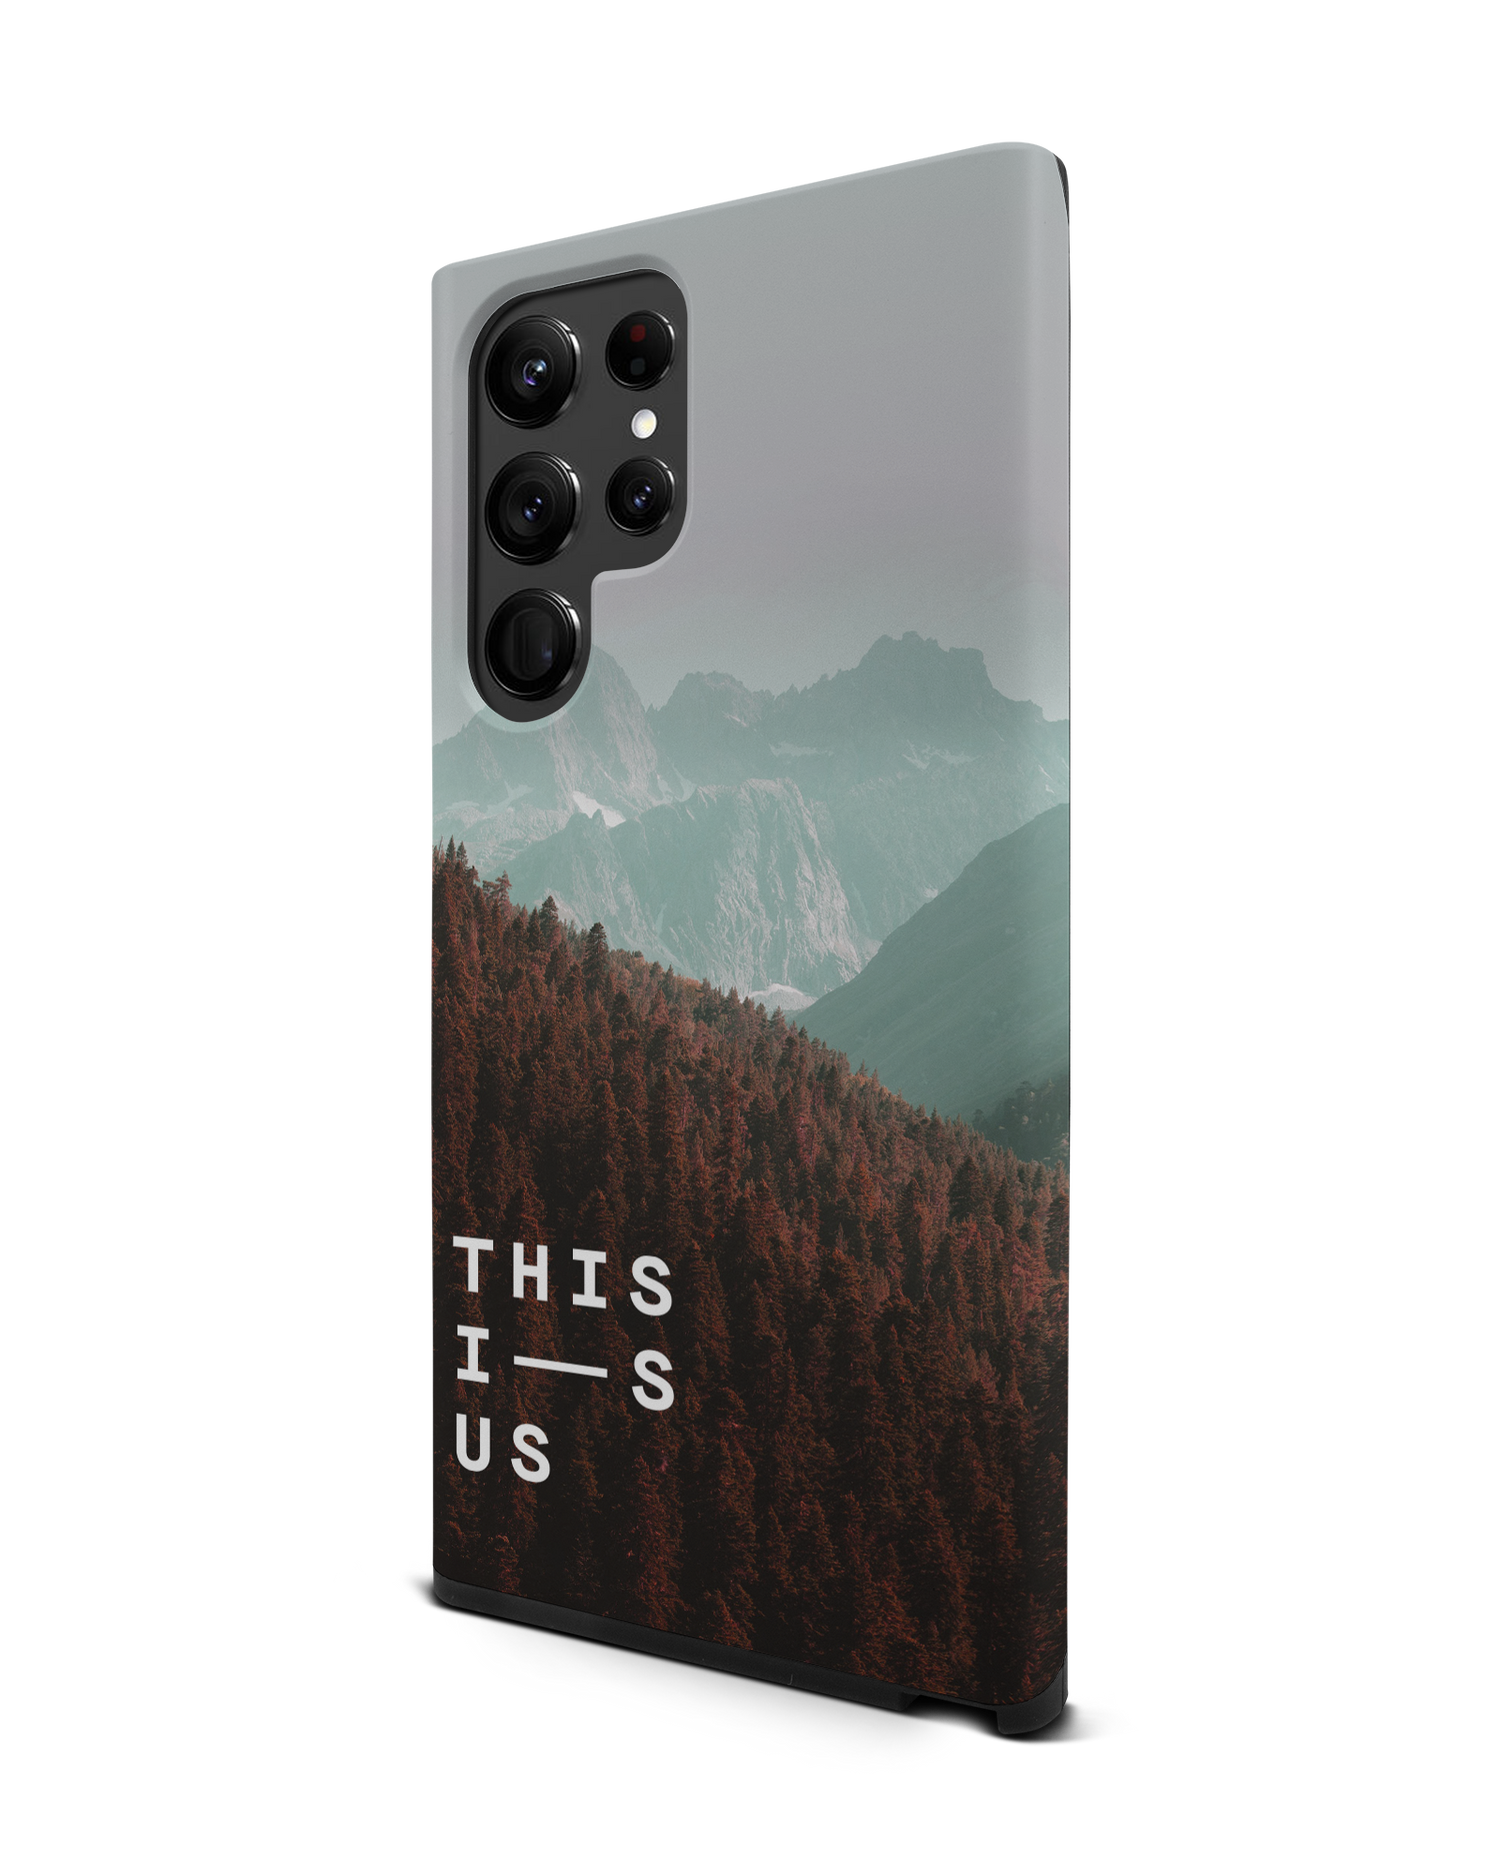 Into the Woods Premium Phone Case Samsung Galaxy S22 Ultra 5G: View from the right side